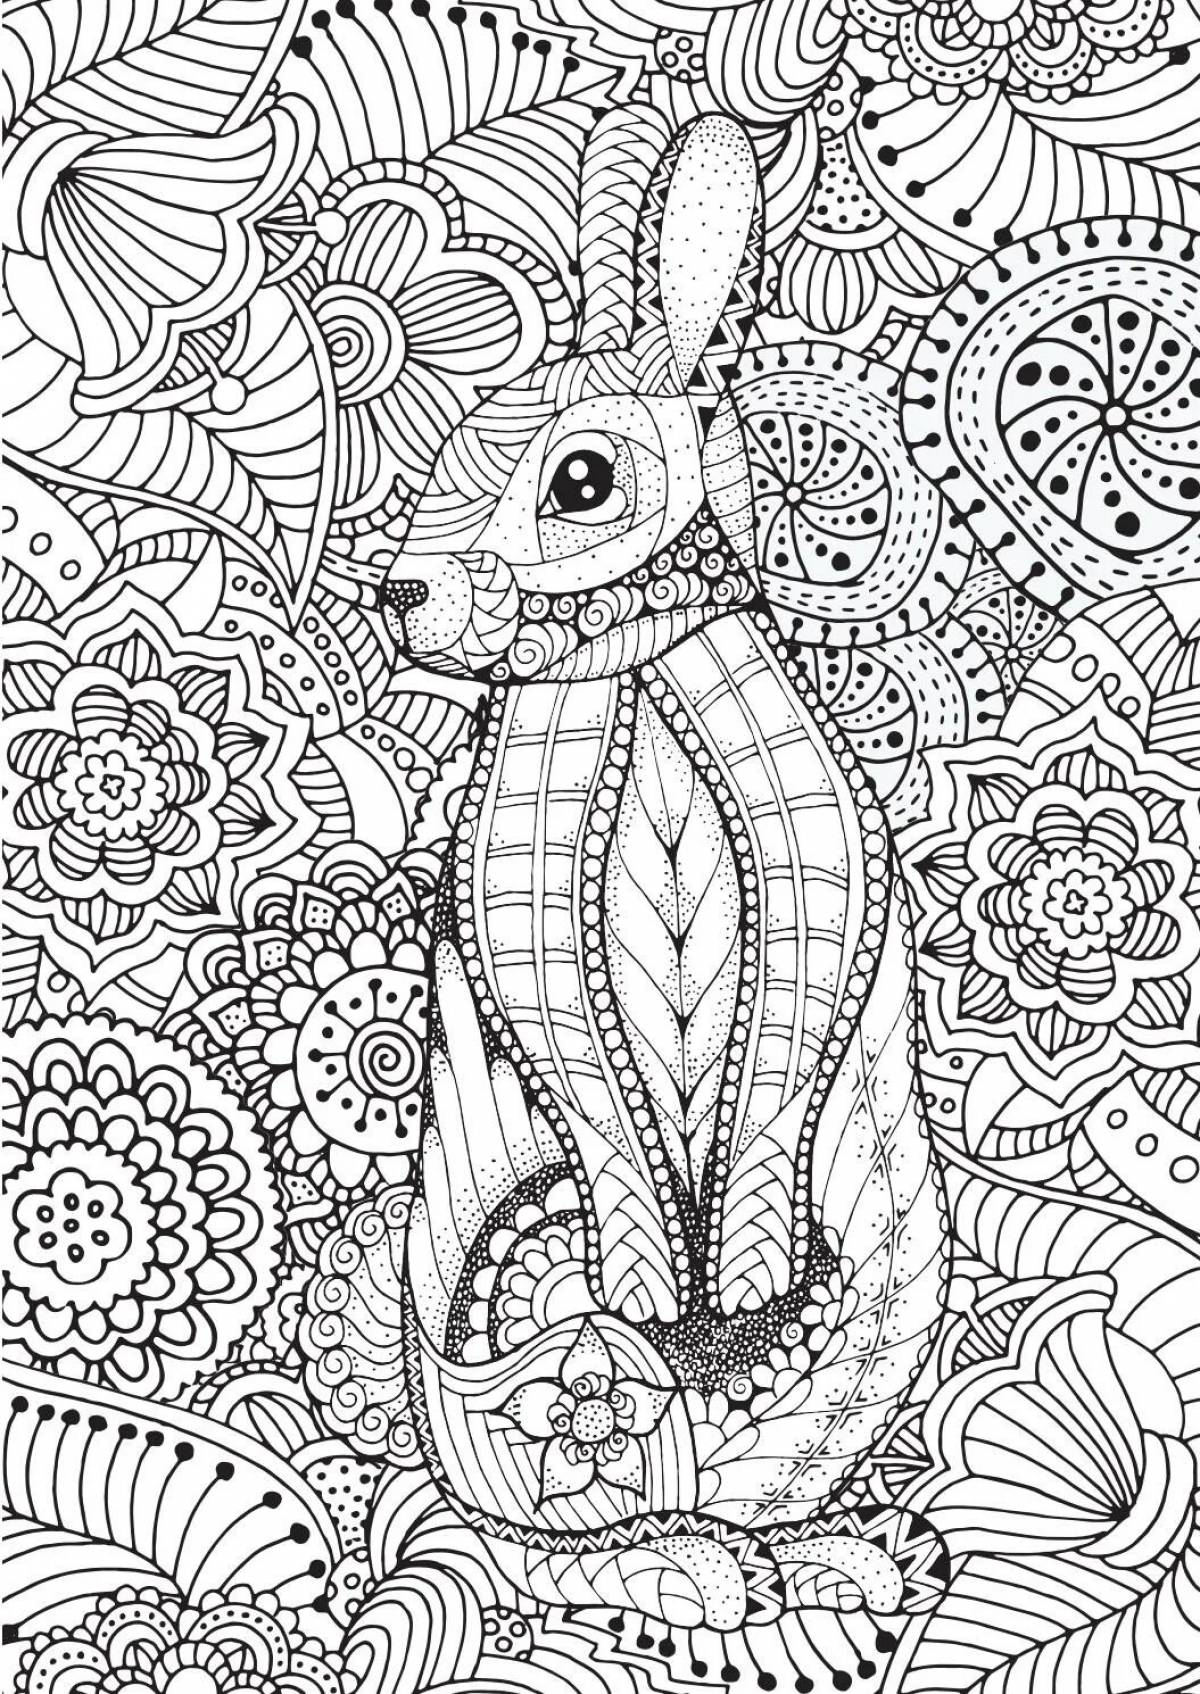 Surreal adult coloring book